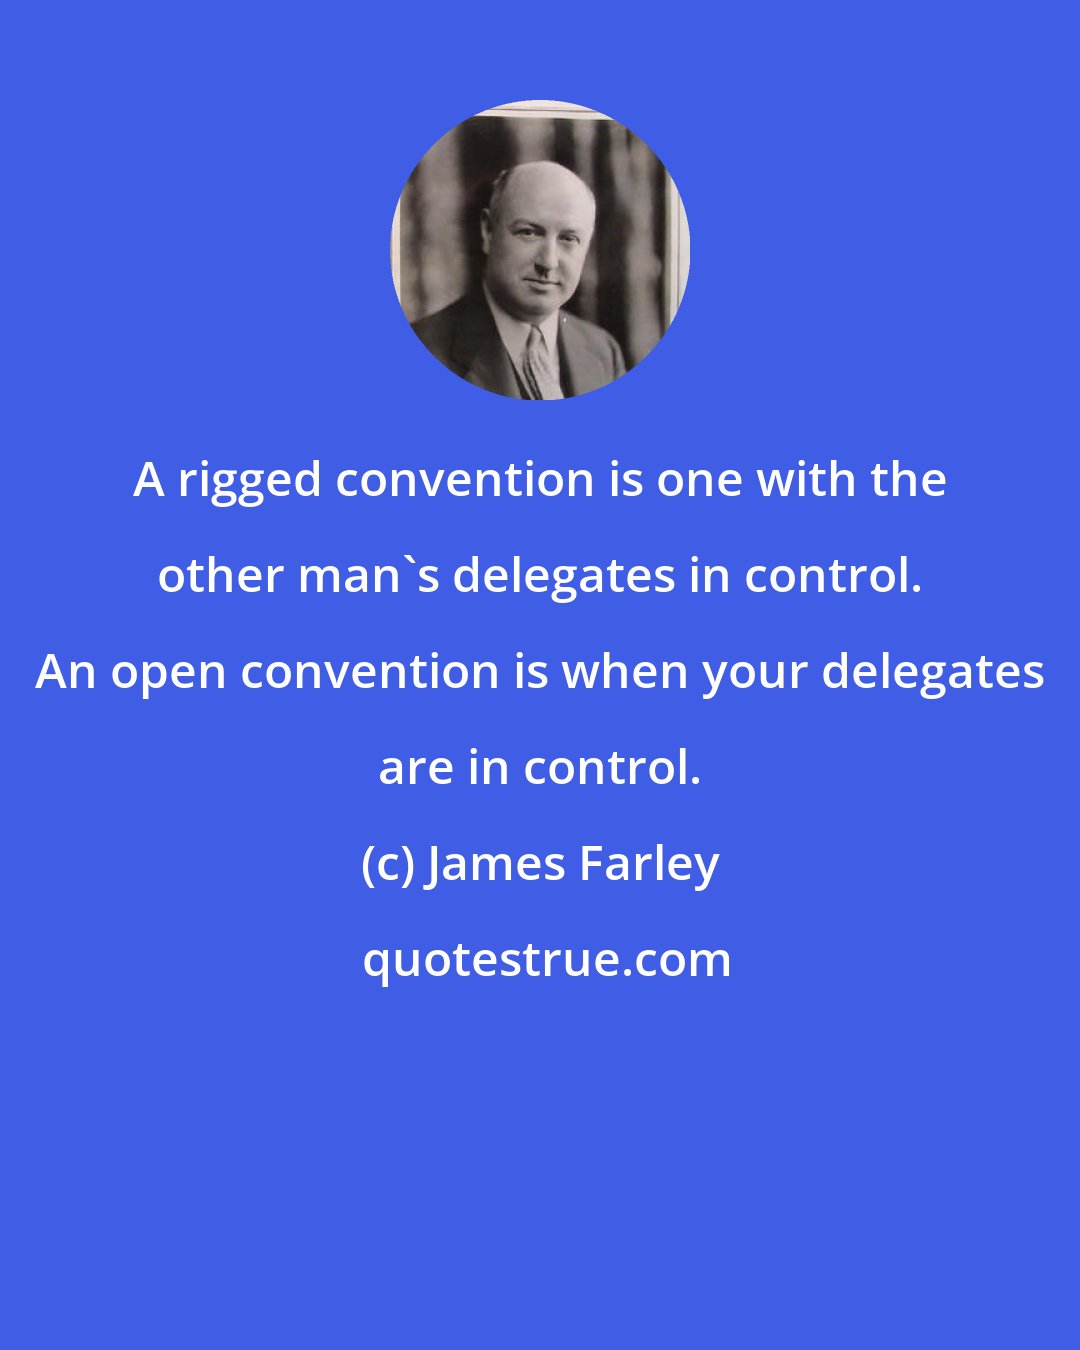 James Farley: A rigged convention is one with the other man's delegates in control. An open convention is when your delegates are in control.